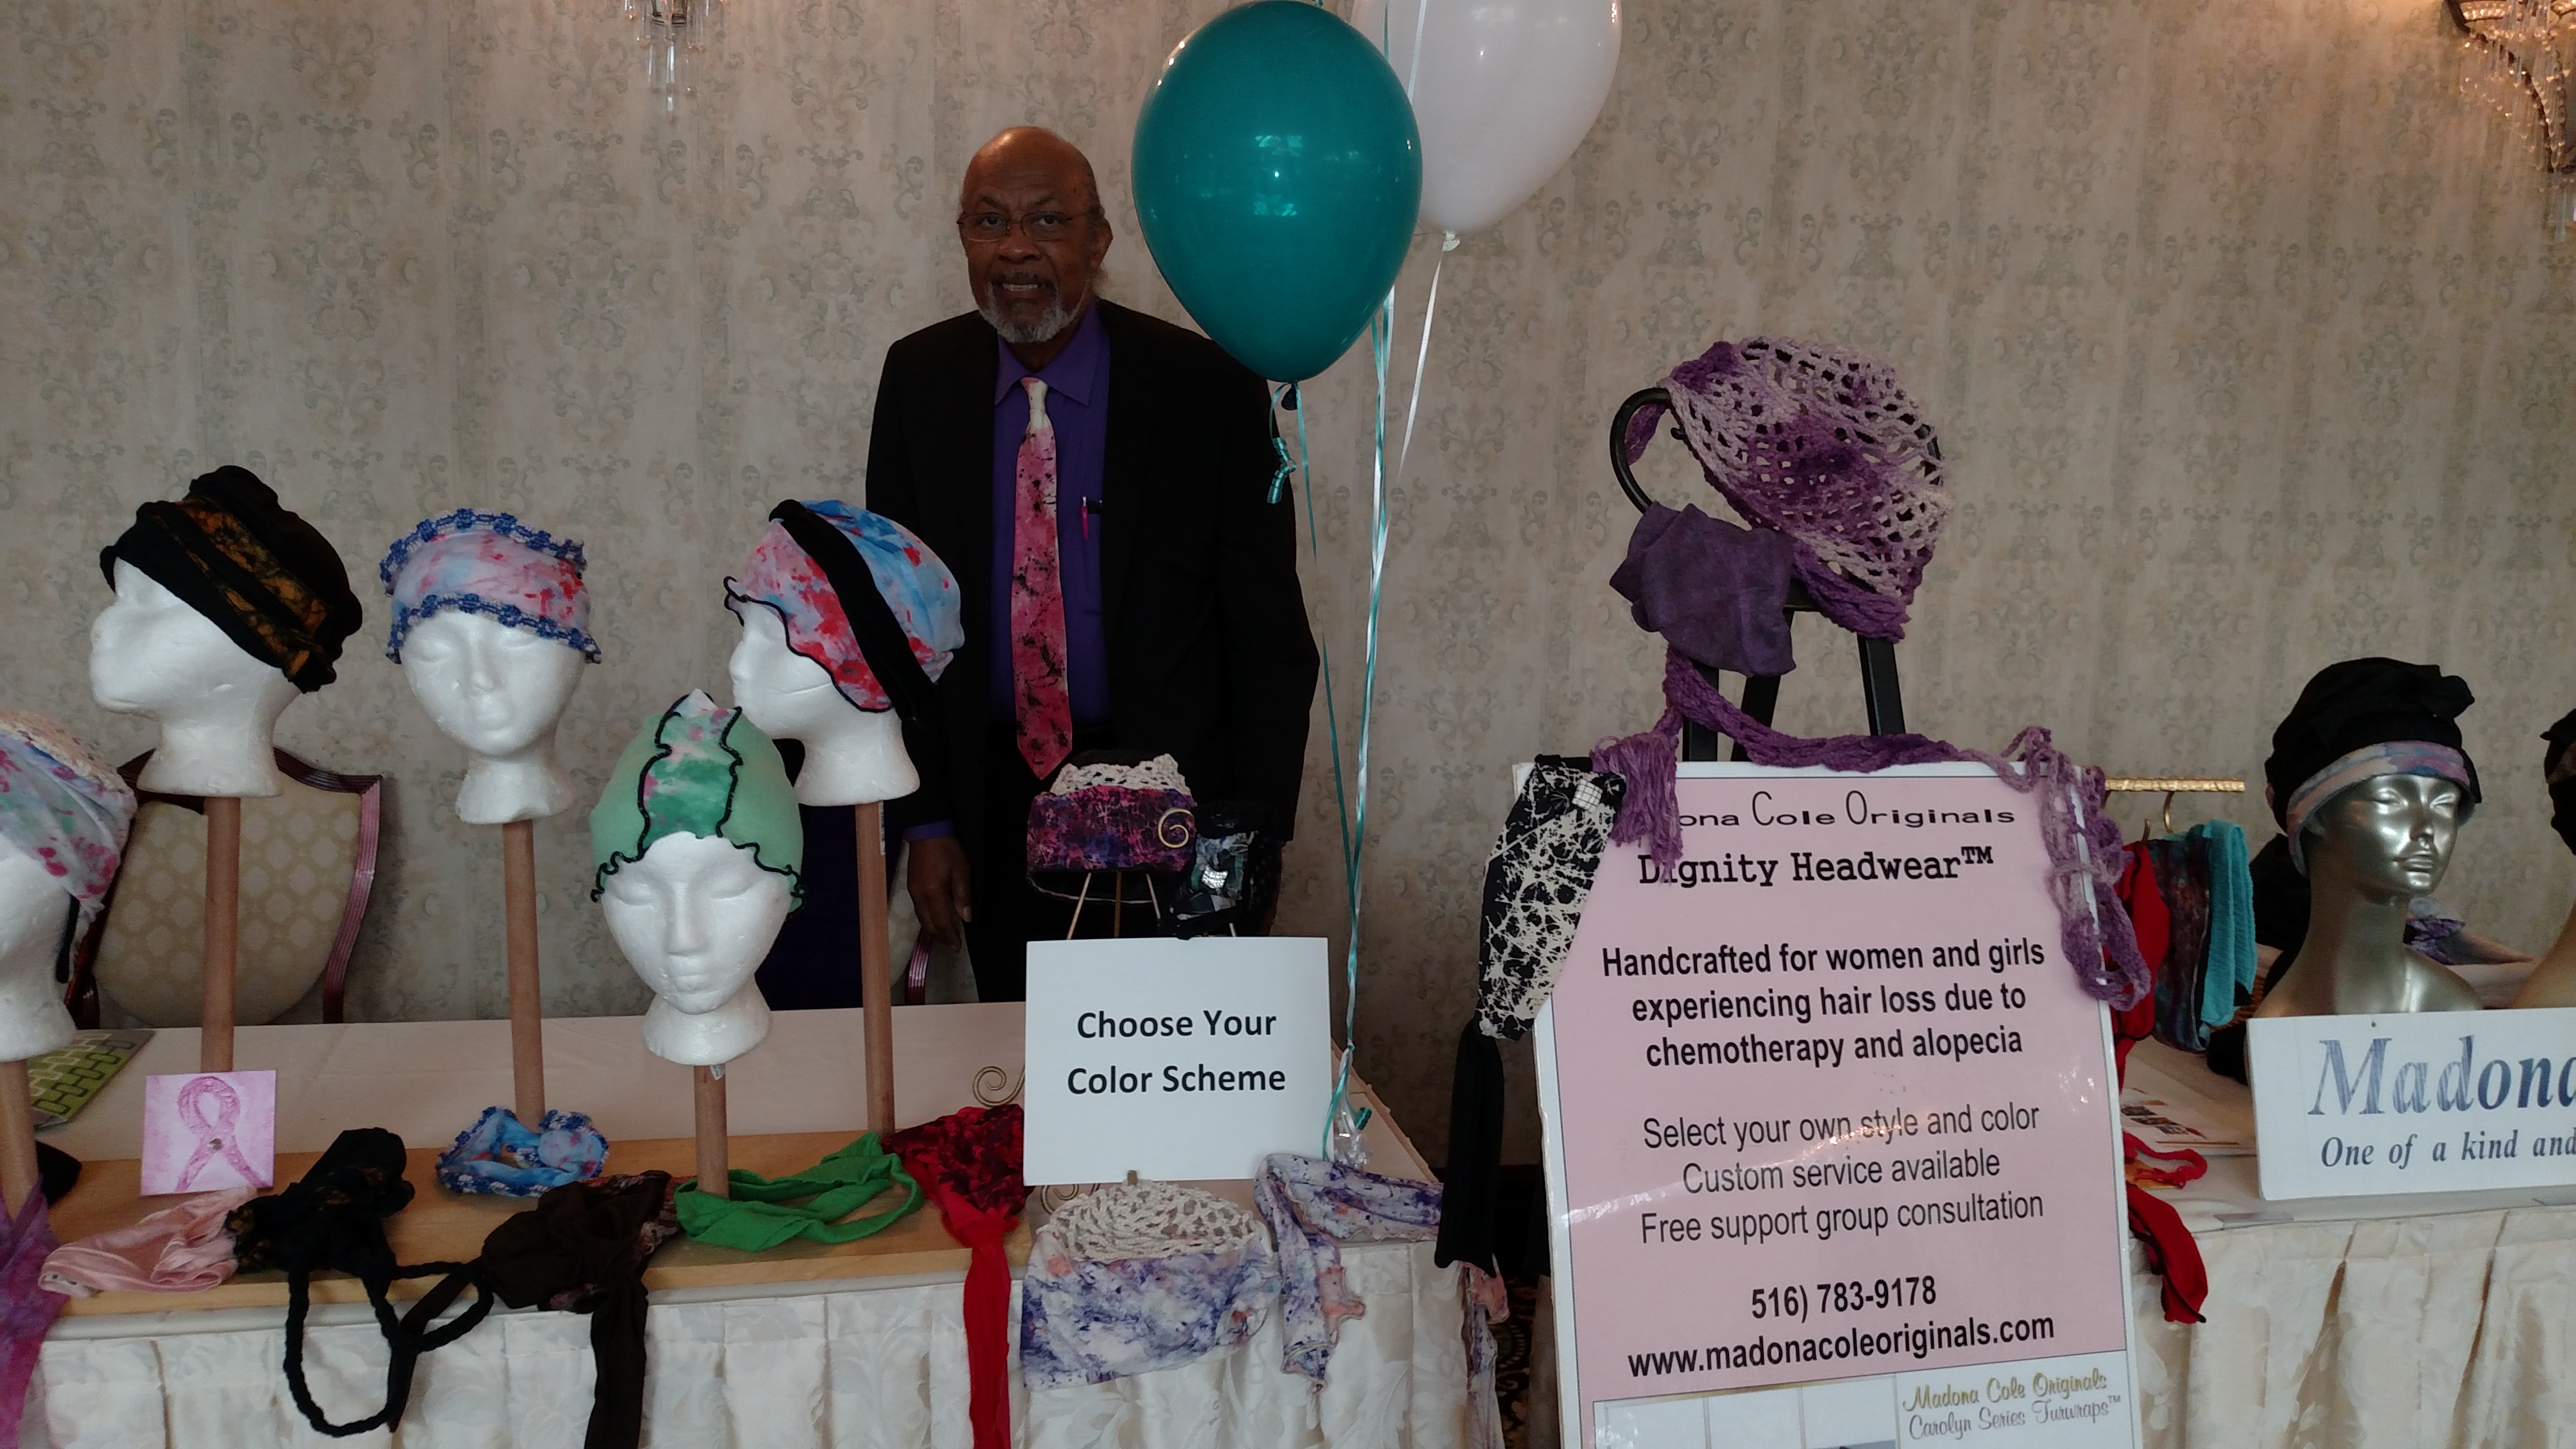 James Lacy with Madona Cole Originals at SASS Foundation Event 